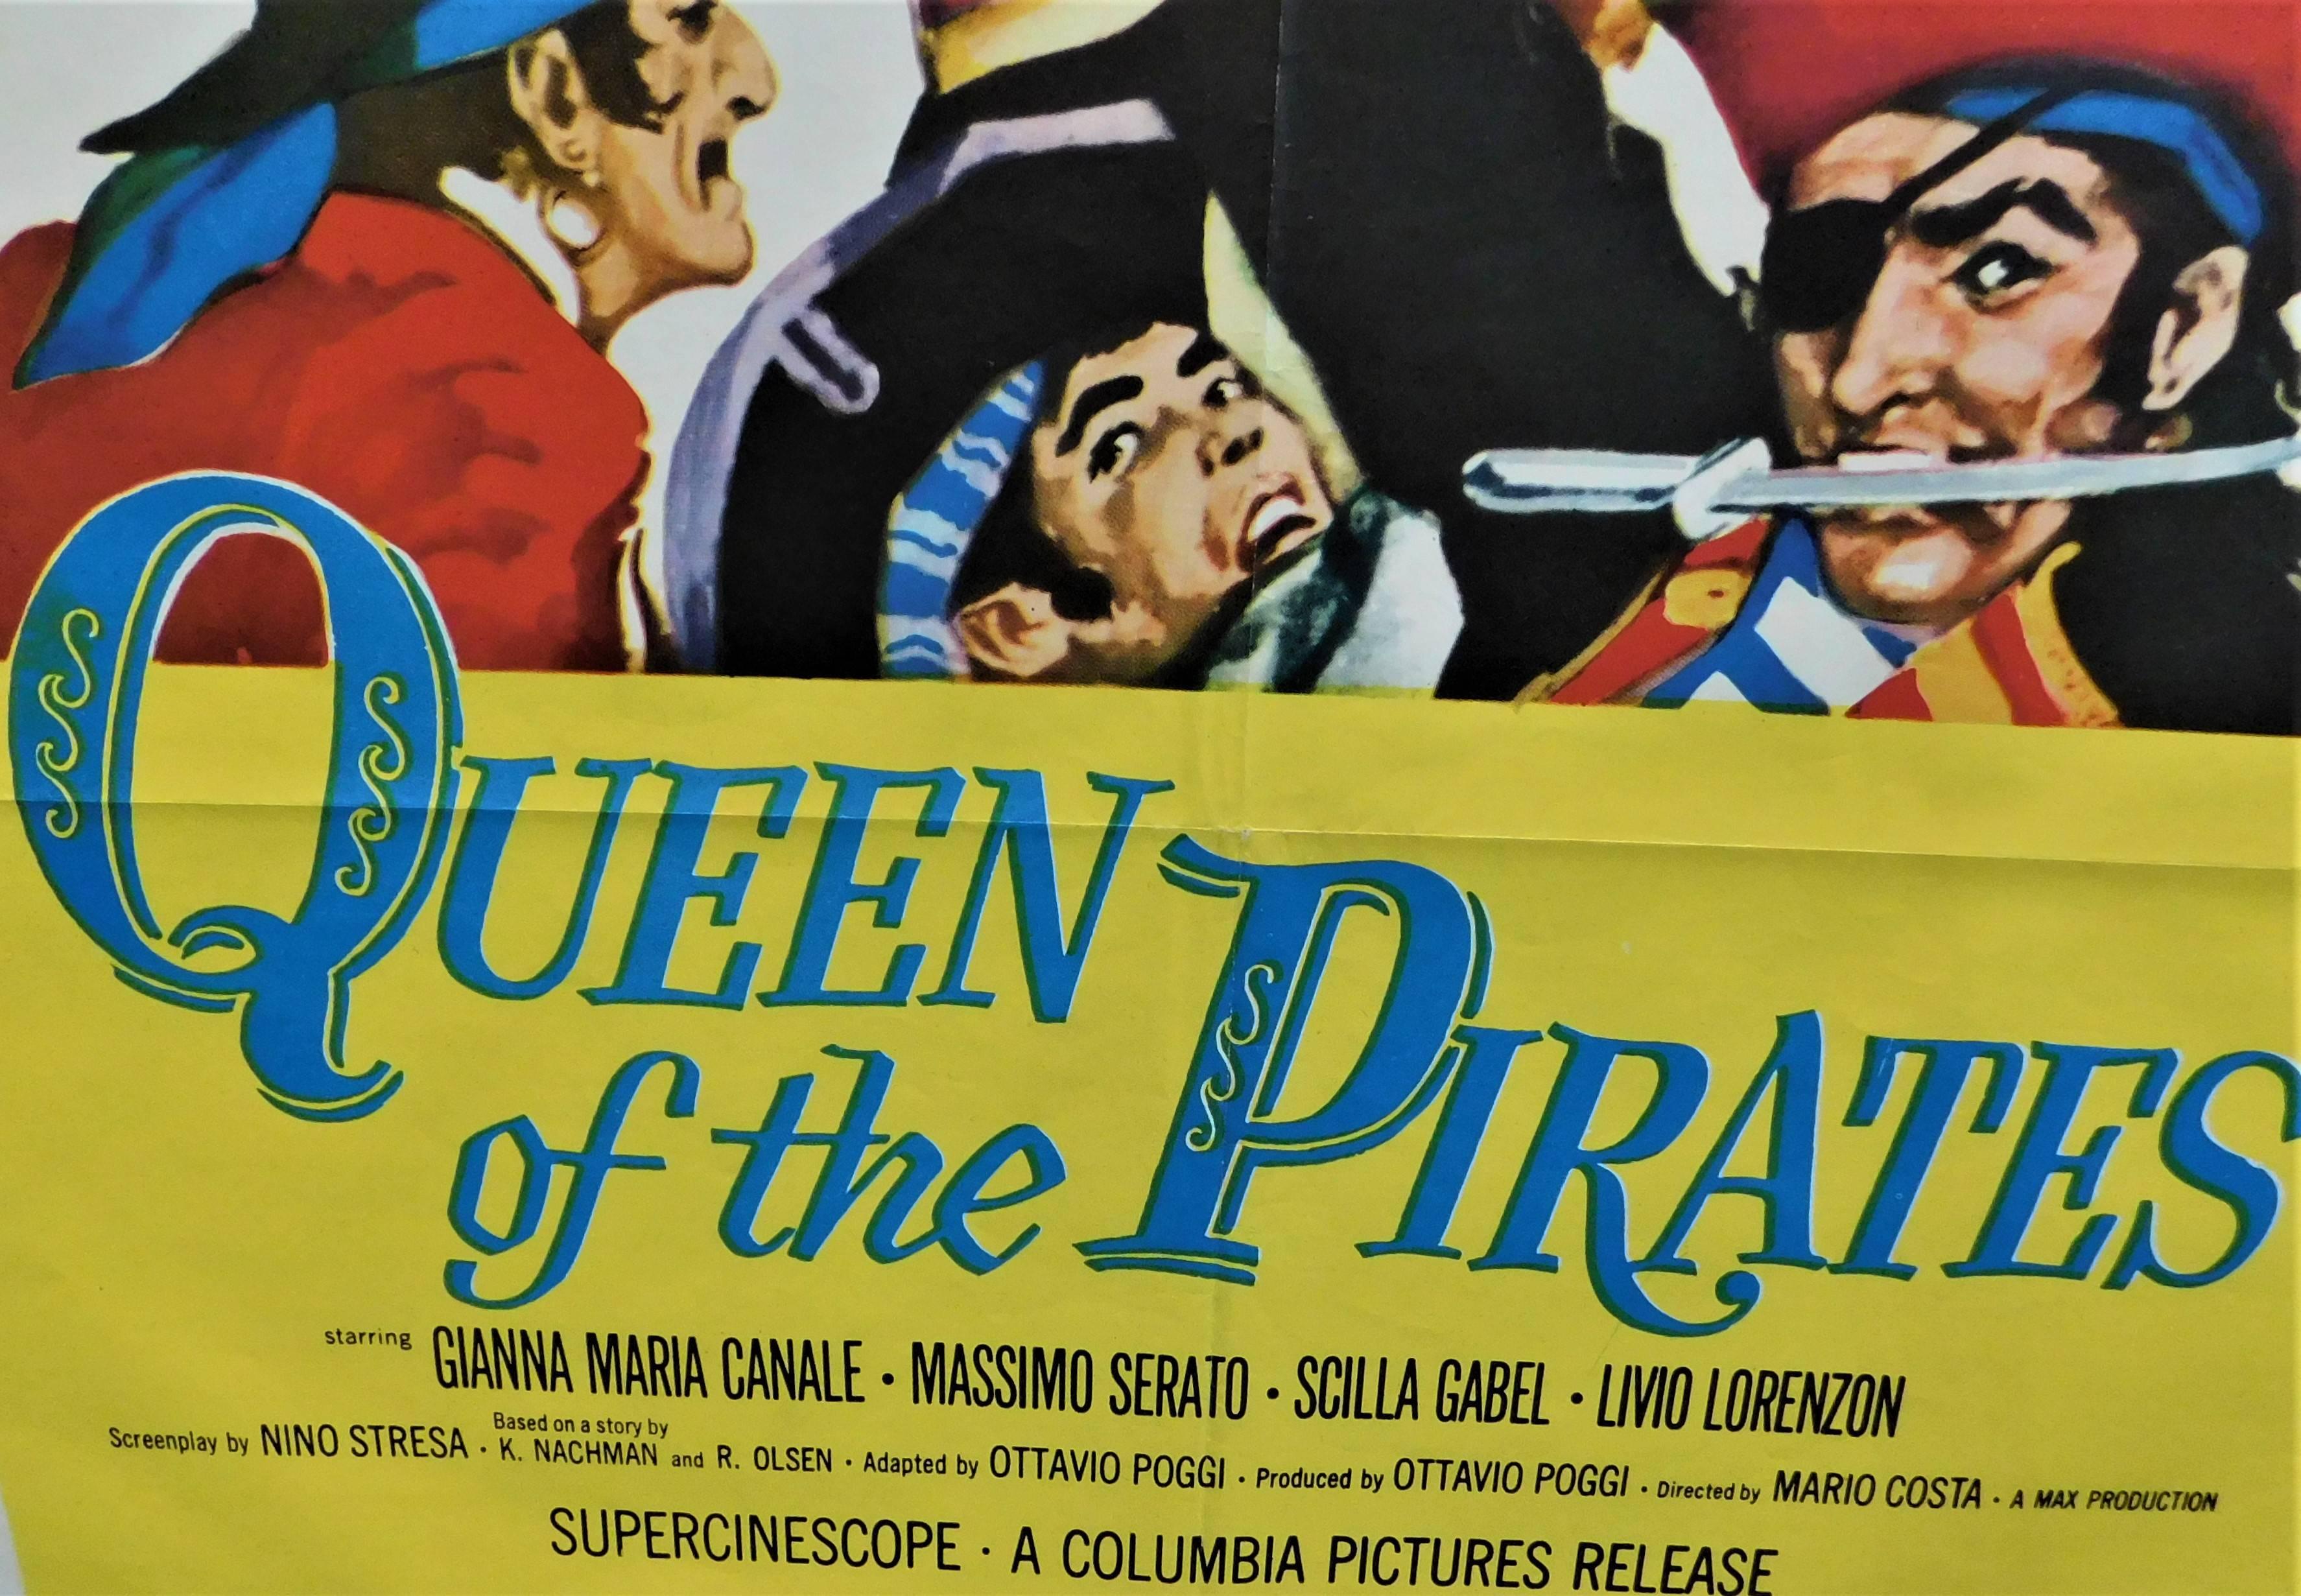 pirate movie posters